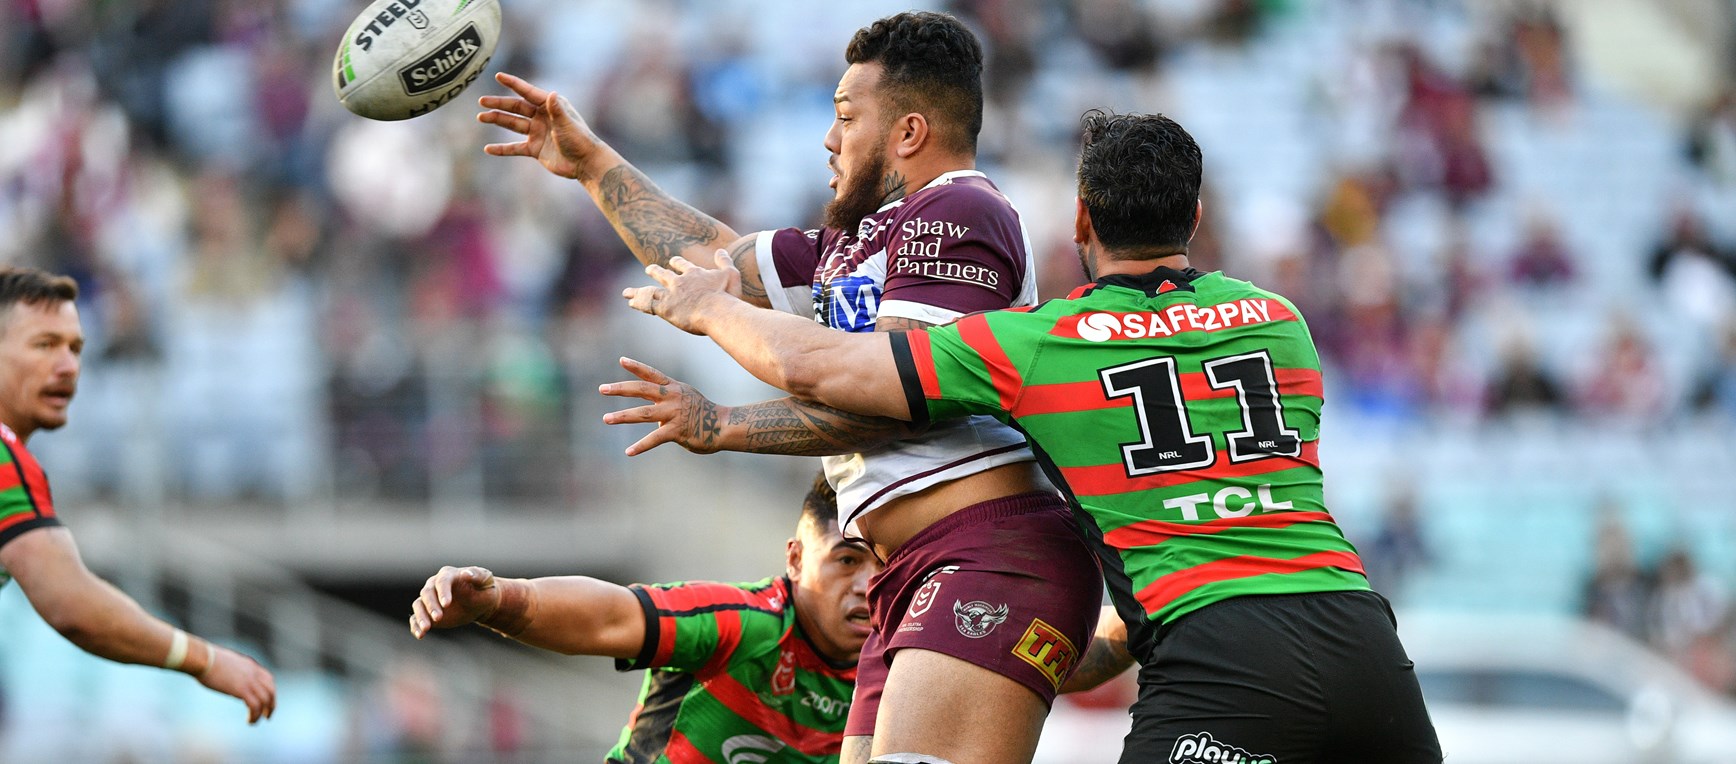 Gallery | Rd 17 vs Souths